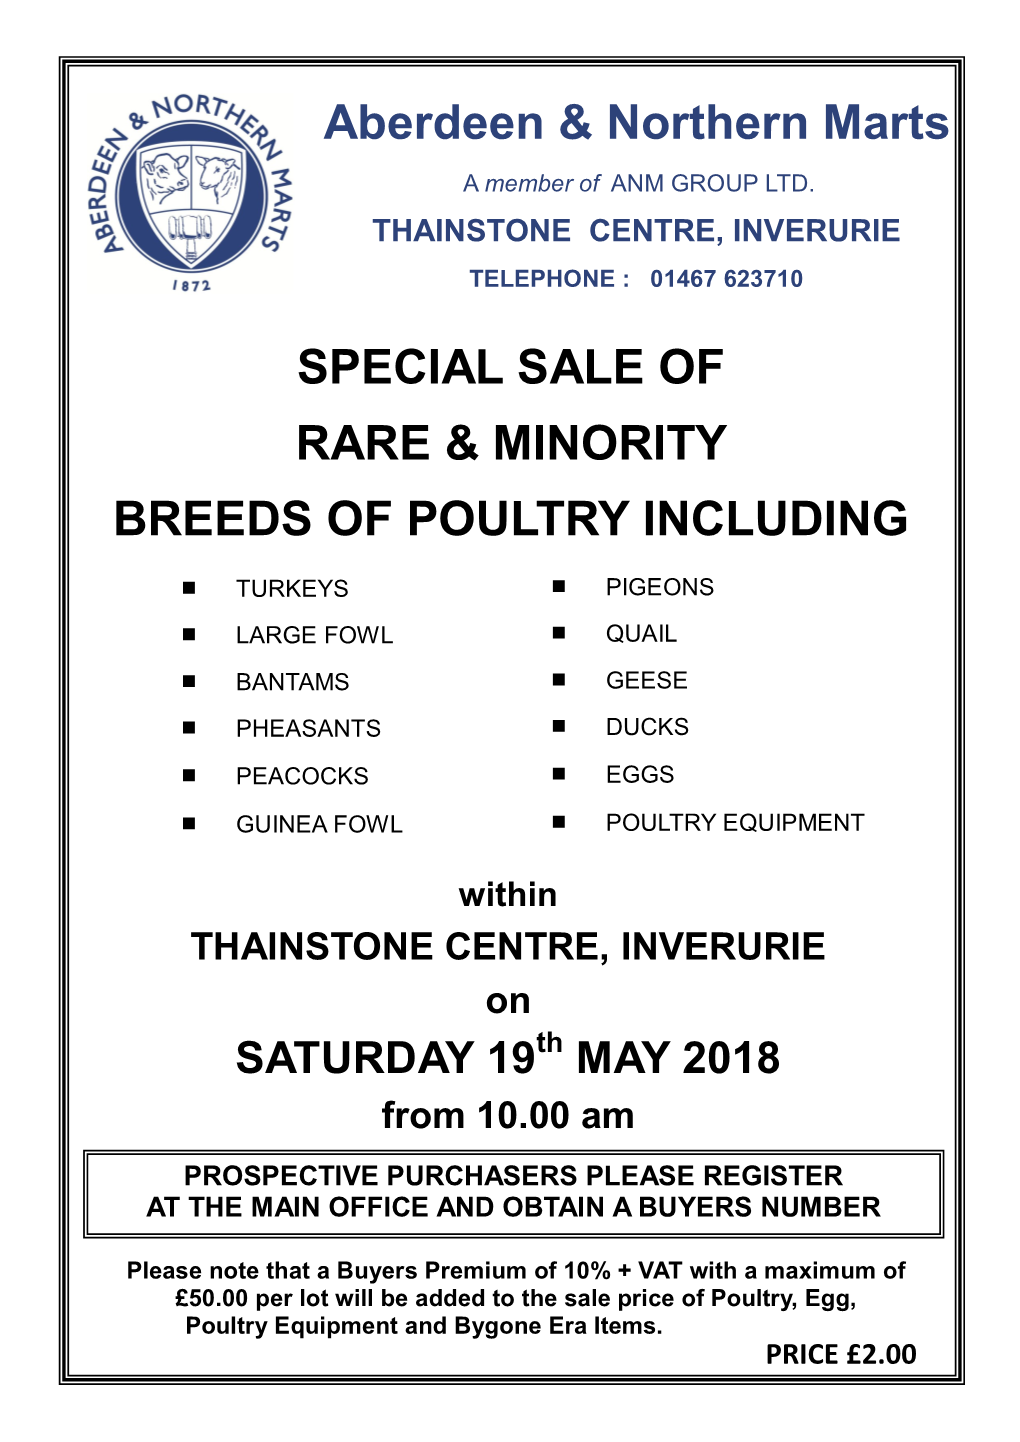 Aberdeen & Northern Marts SPECIAL SALE of RARE & MINORITY